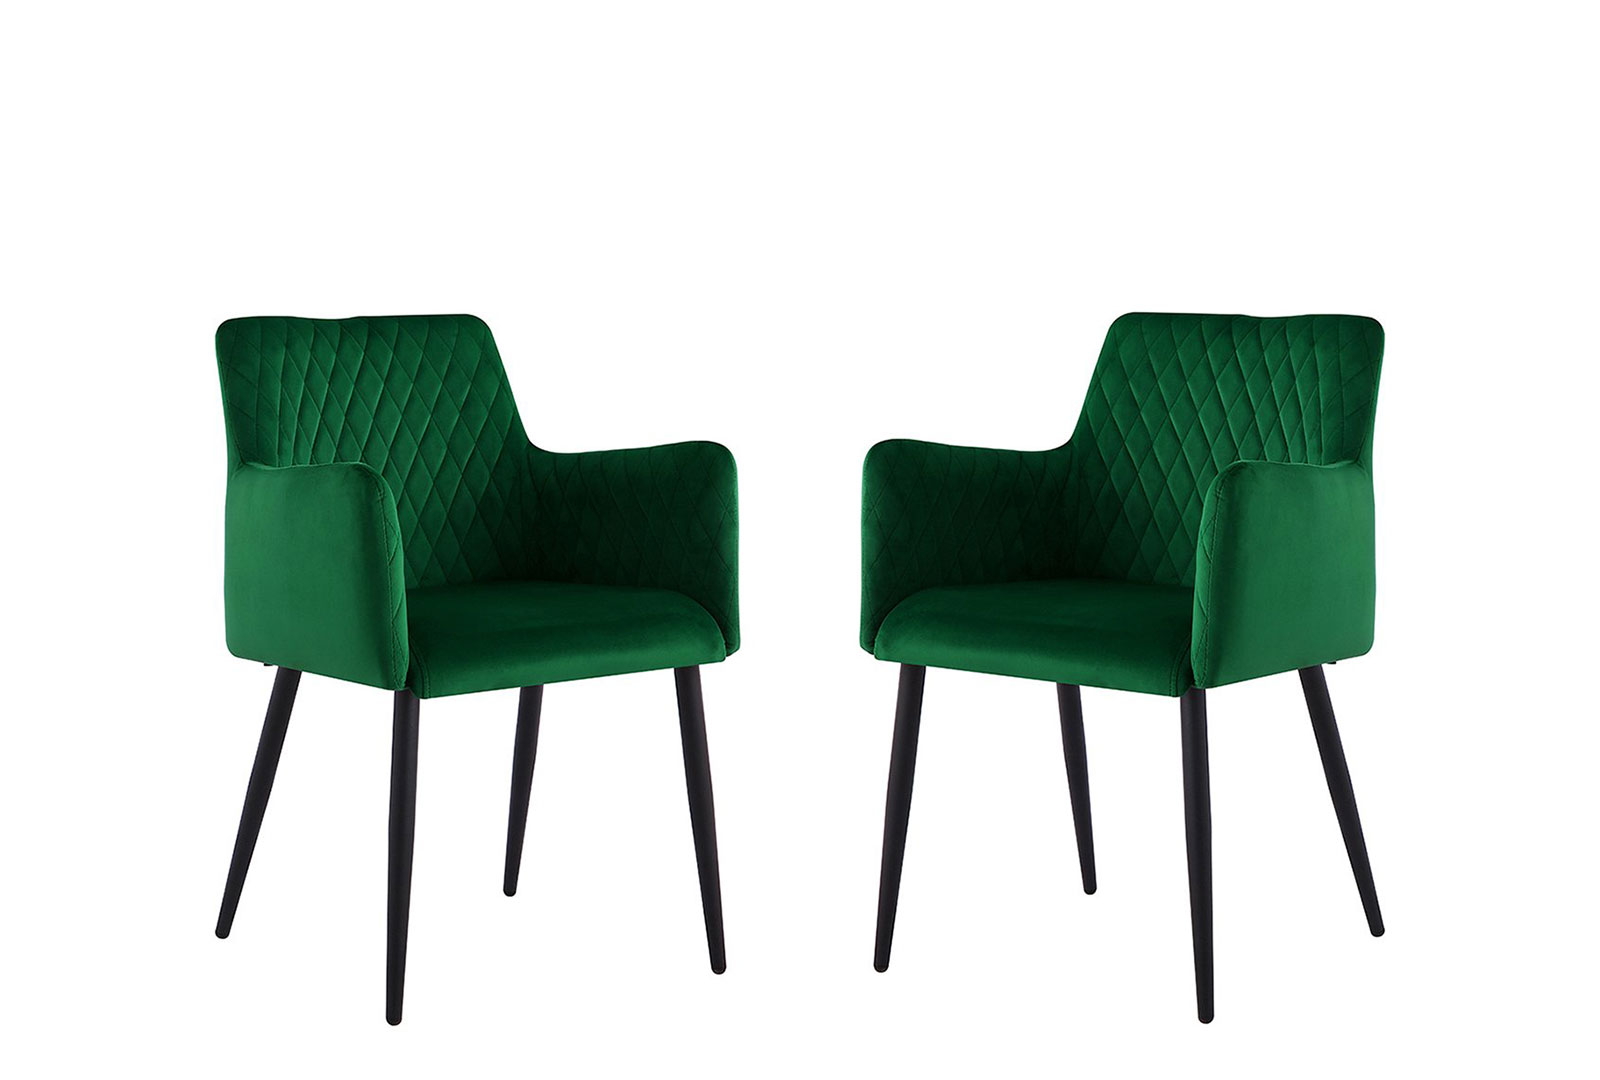 A set of two modern Archie 110 chairs